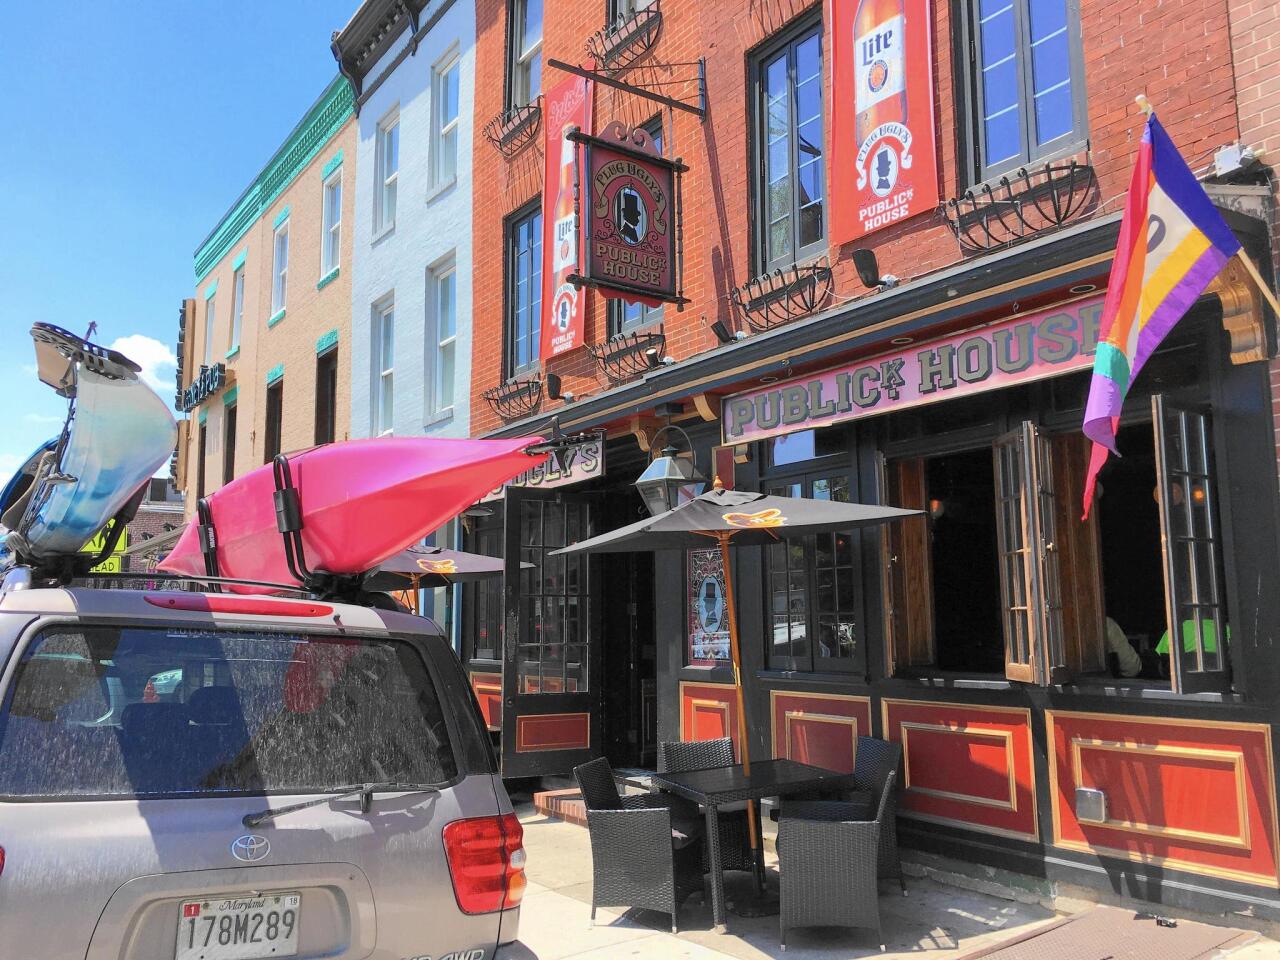 Plug Ugly’s Publick House is one of several watering holes and restaurants around O’Donnell Square in Baltimore’s waterfront Canton neighborhood.